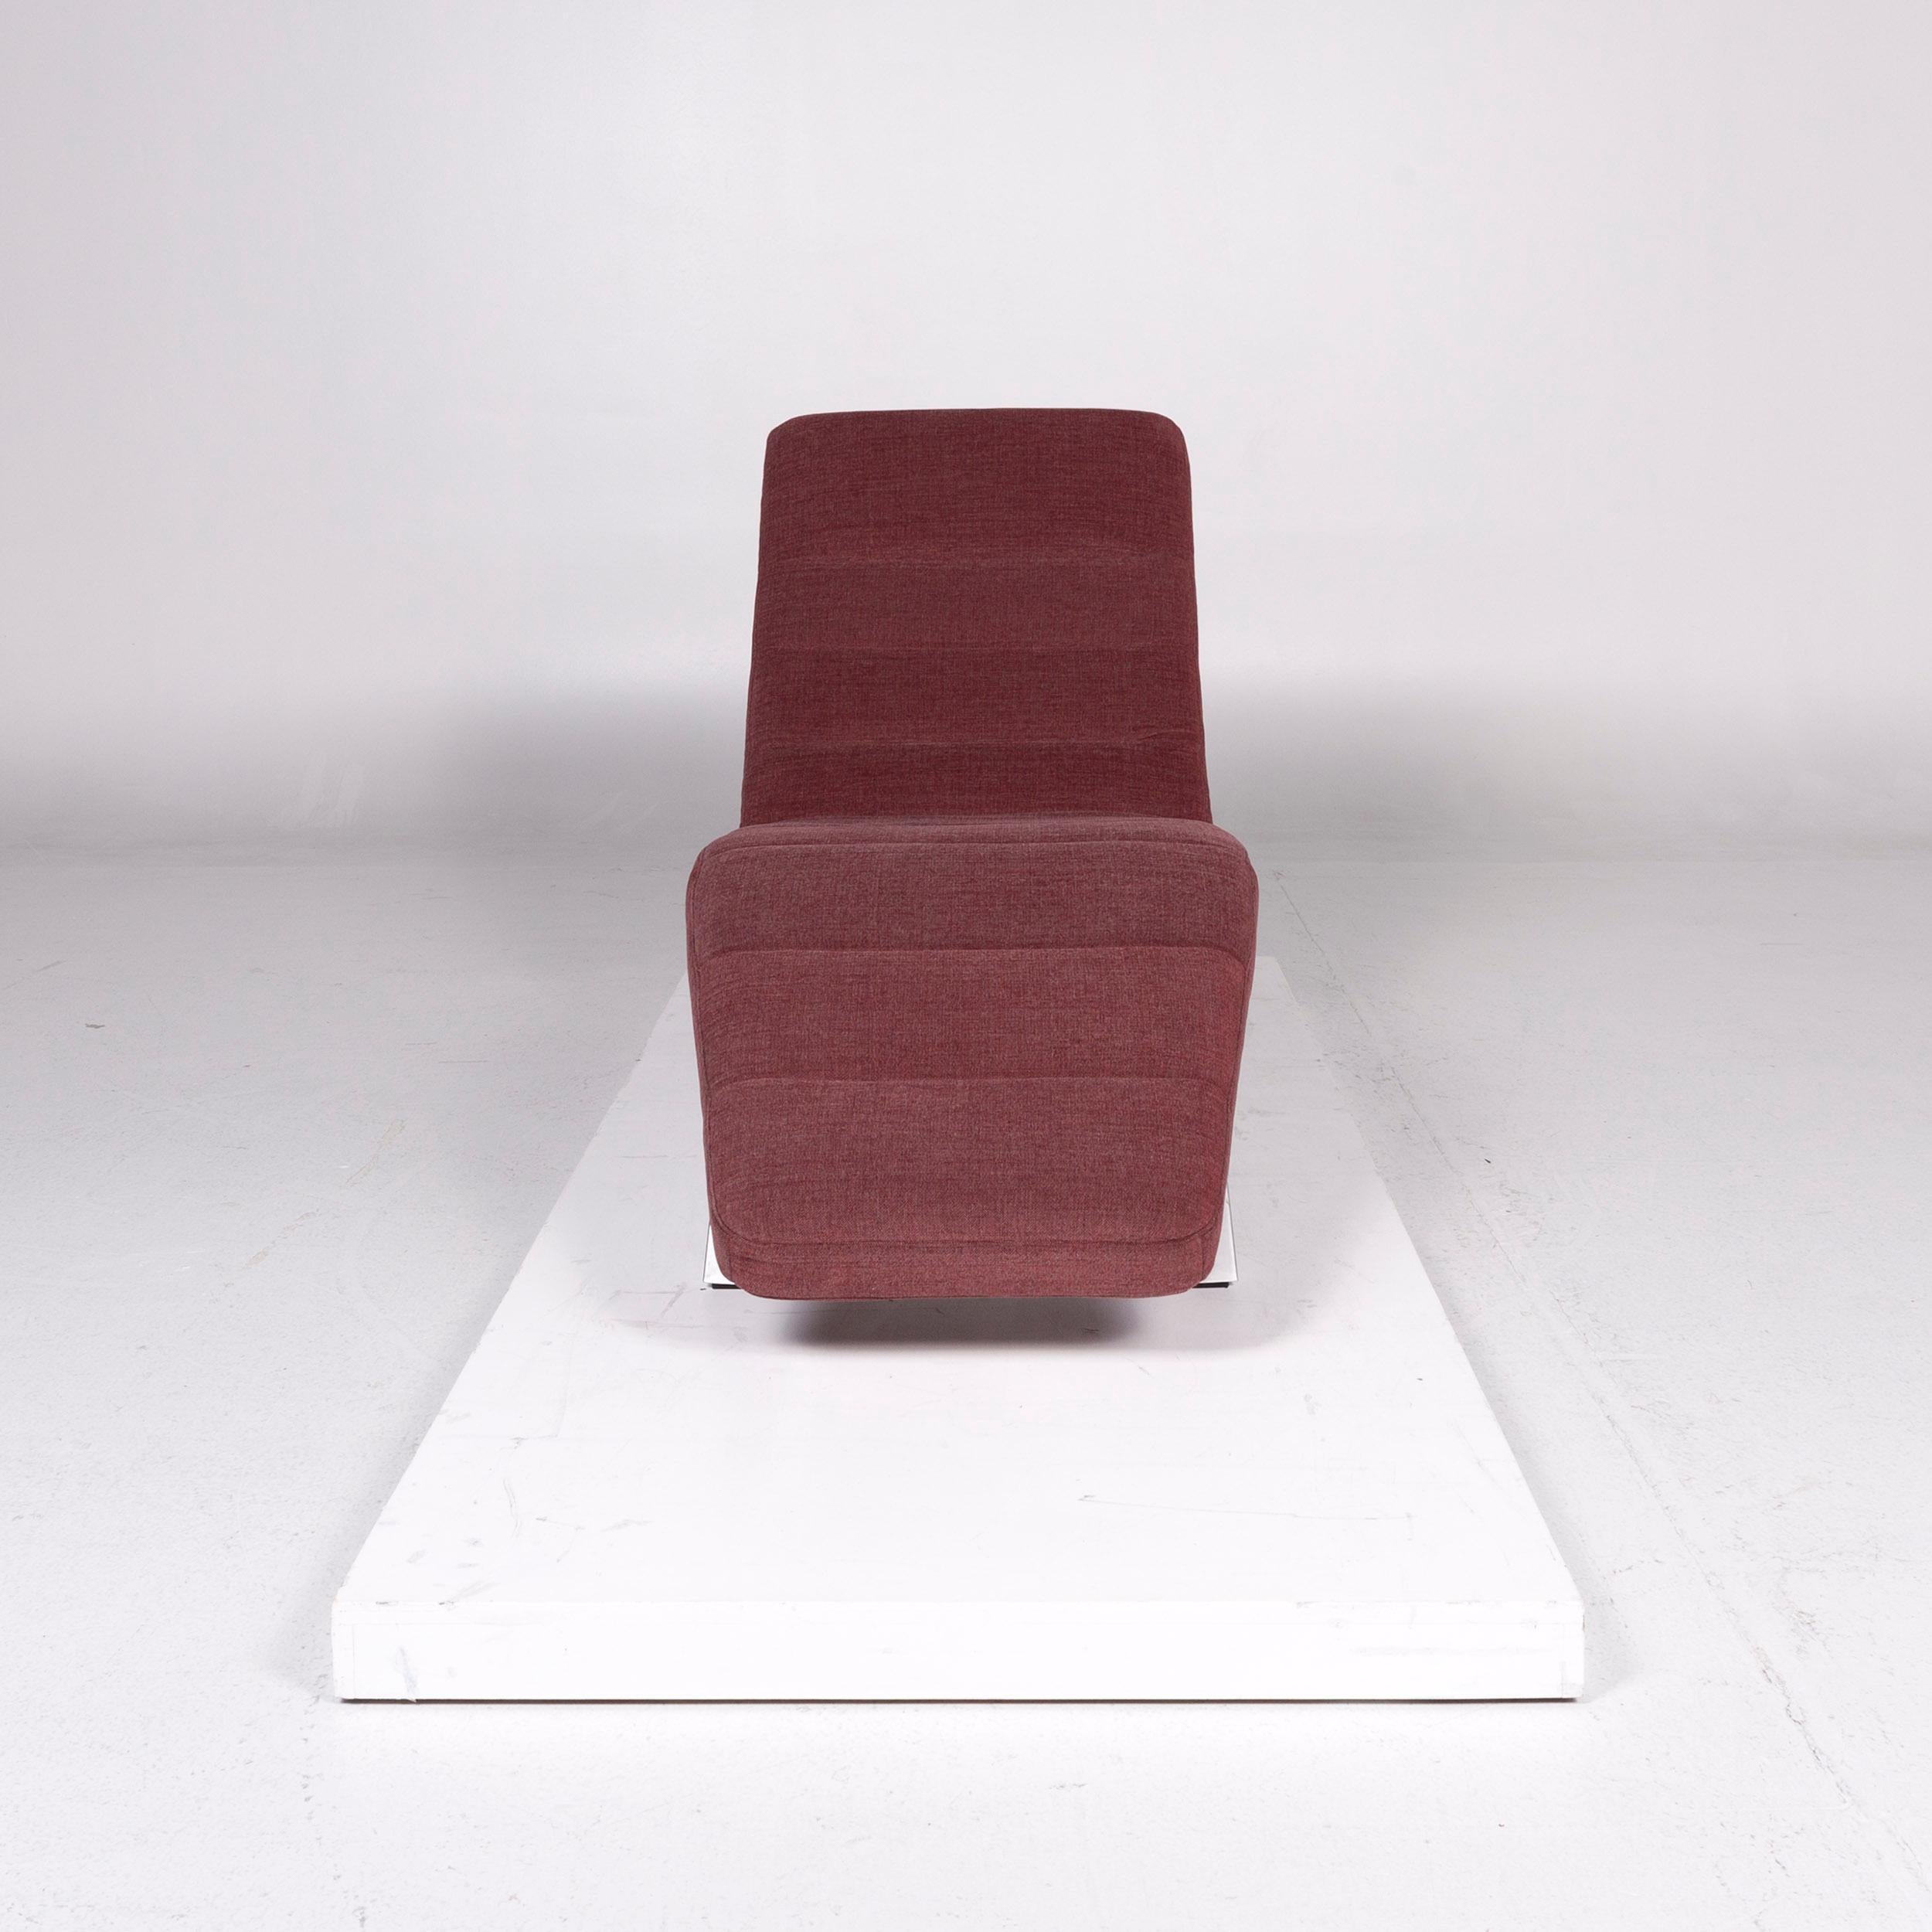 We bring to you a Willi Schillig fabric lounger red wine red relax function.
  
 
 Product measurements in centimeters:
 
Depth 168
Width 65
Height 95
Seat-height 43
Seat-depth 125
Seat-width 65
Back-height 56.
   